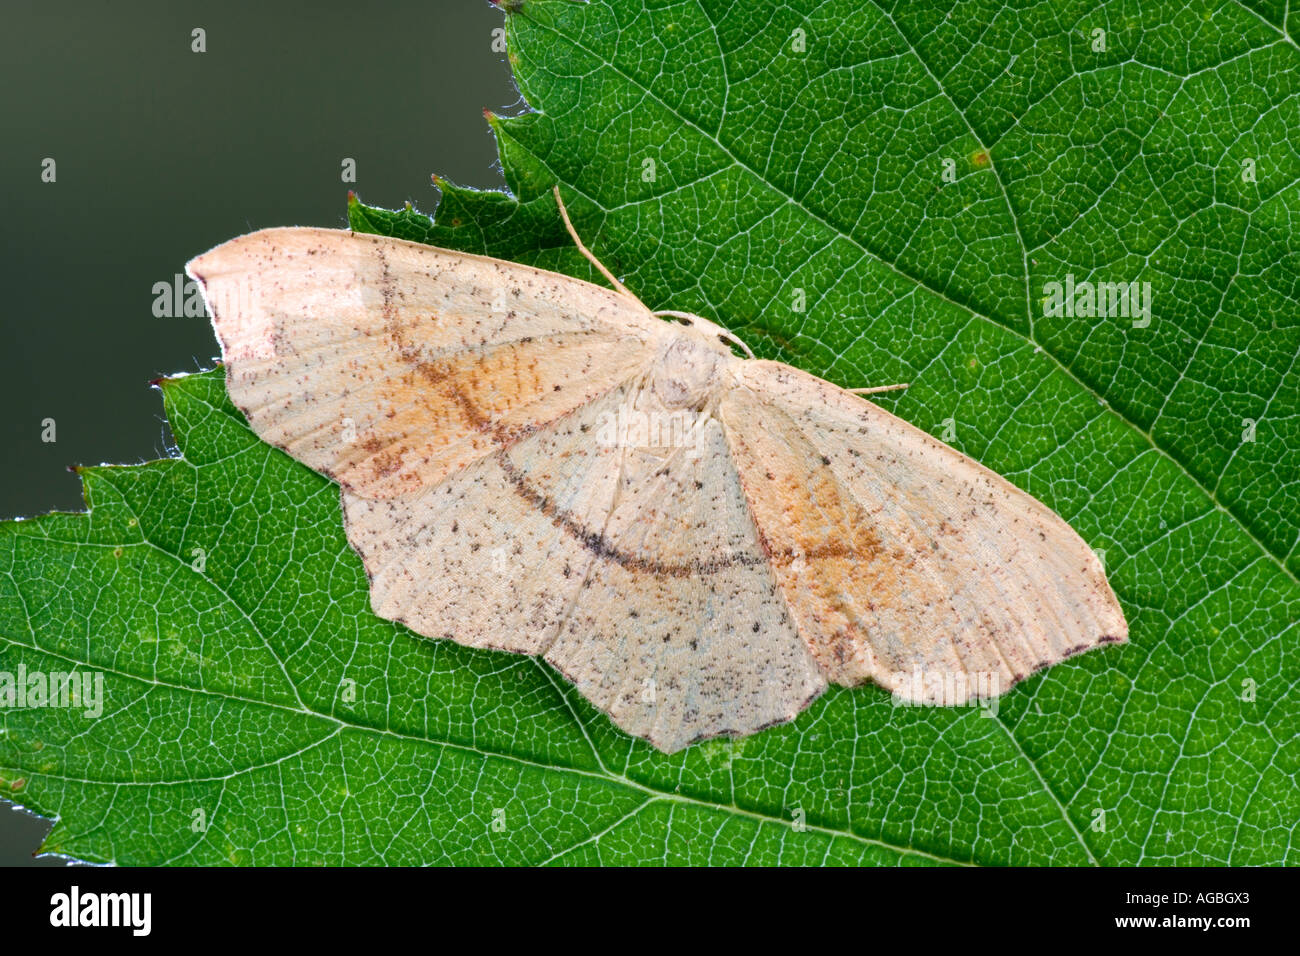 Maidens Blush Cyclophora punctaria at rest on leaf with wings open showing markings and detail Potton Bedfordshire Stock Photo